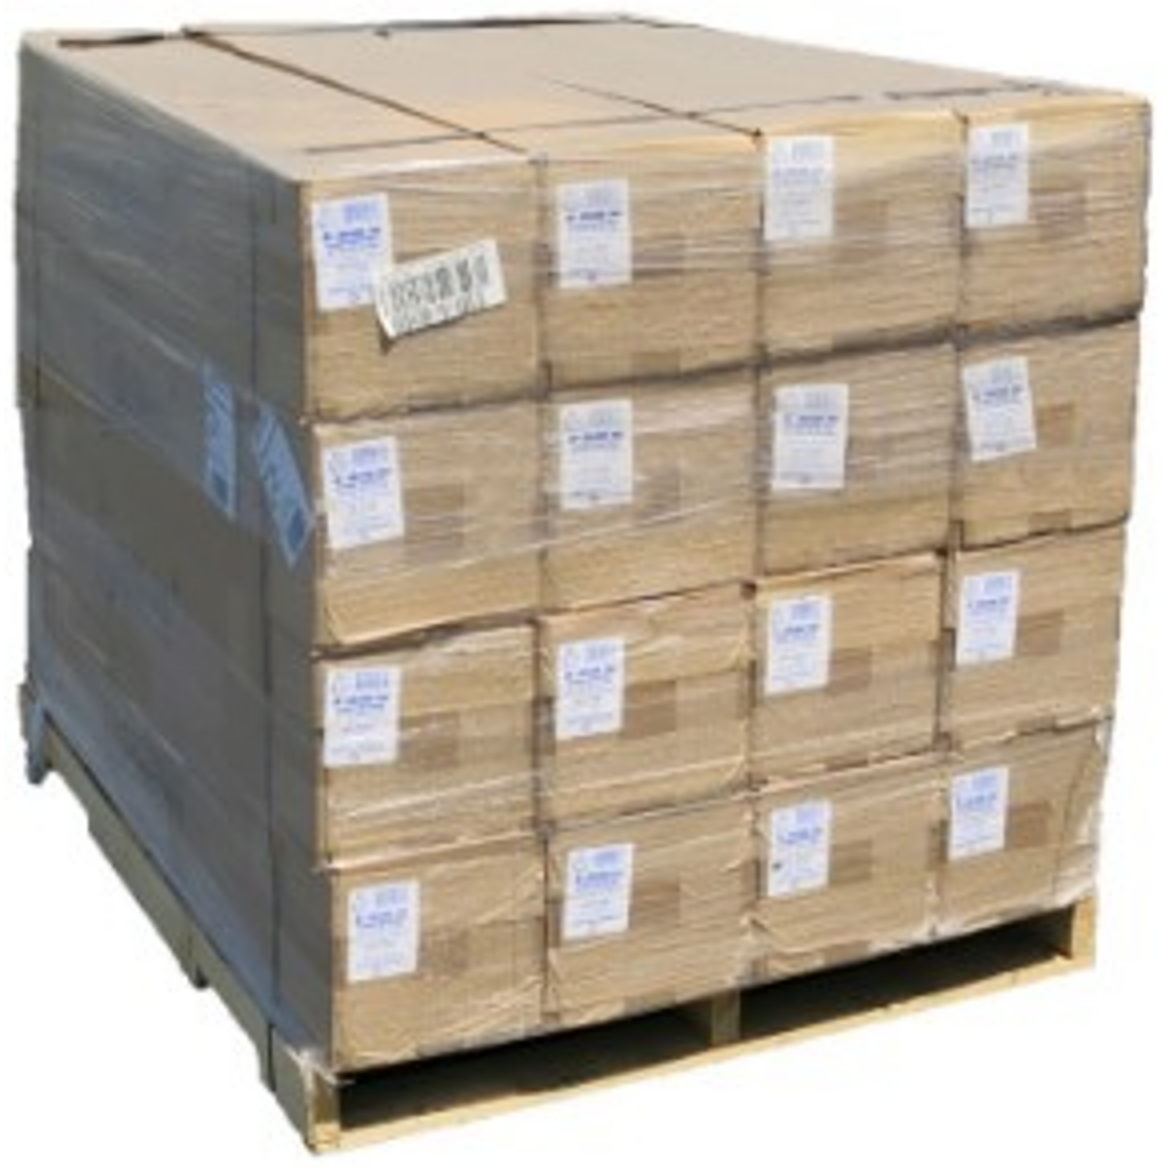 8.4 Packaging Example – Pallet Level - Image 0